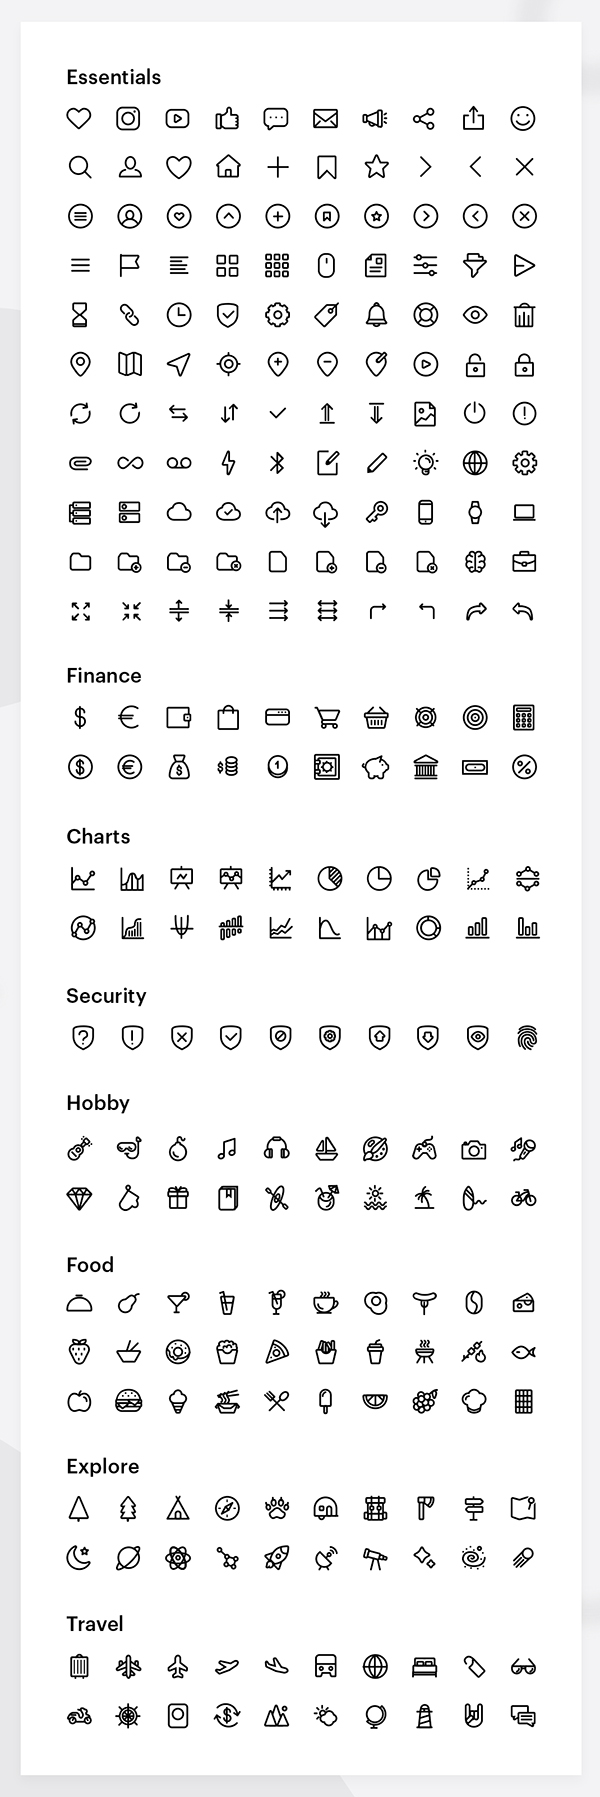 50+ Best Free Icons for 2018